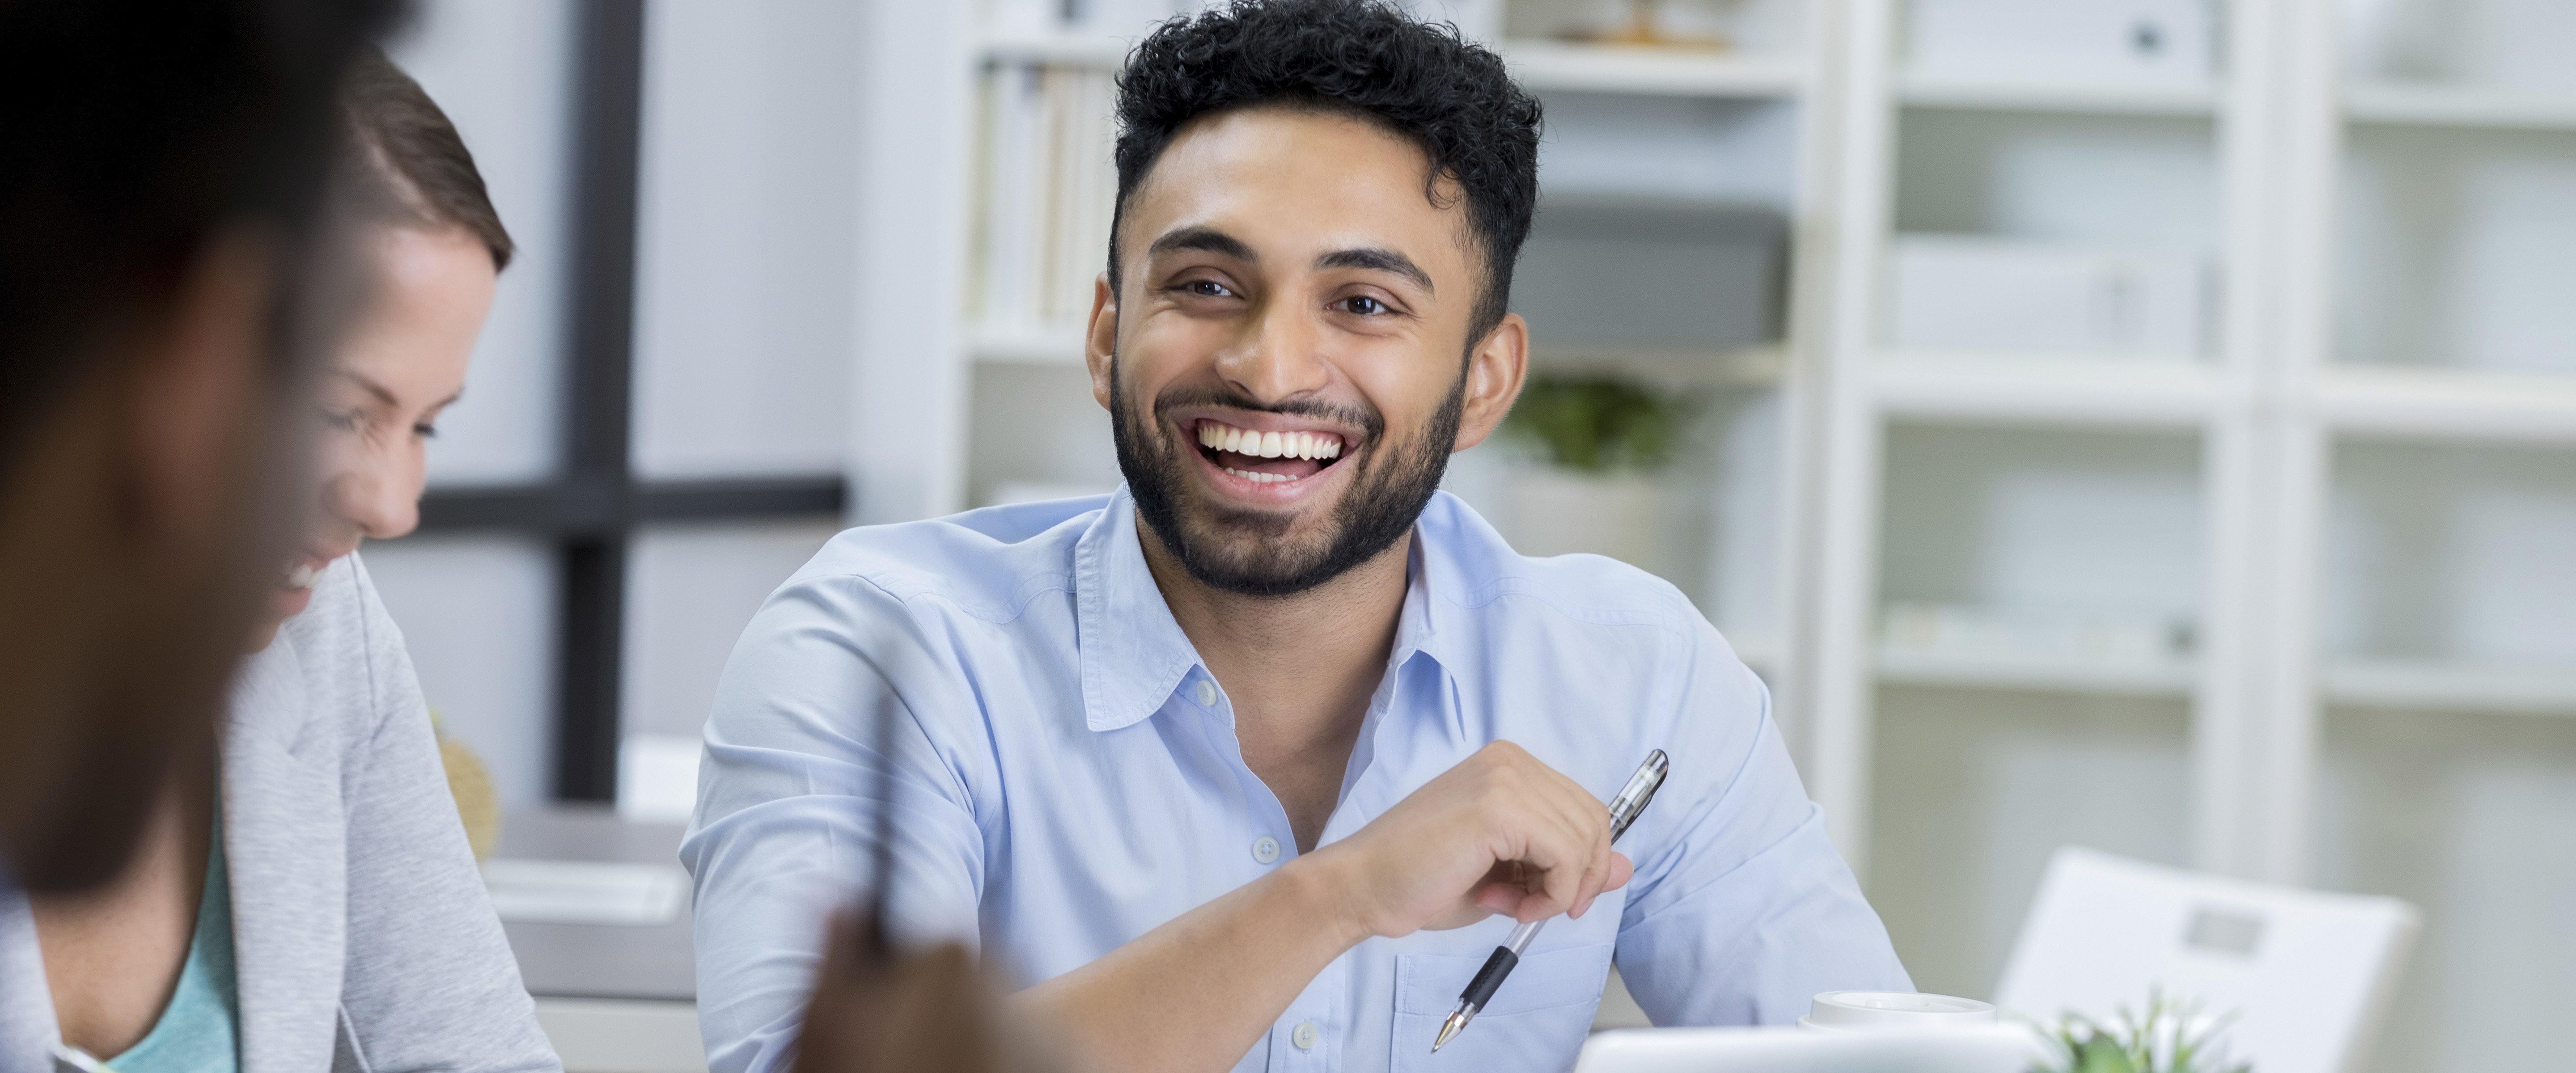 smiling man with pen discussing project with coworkers